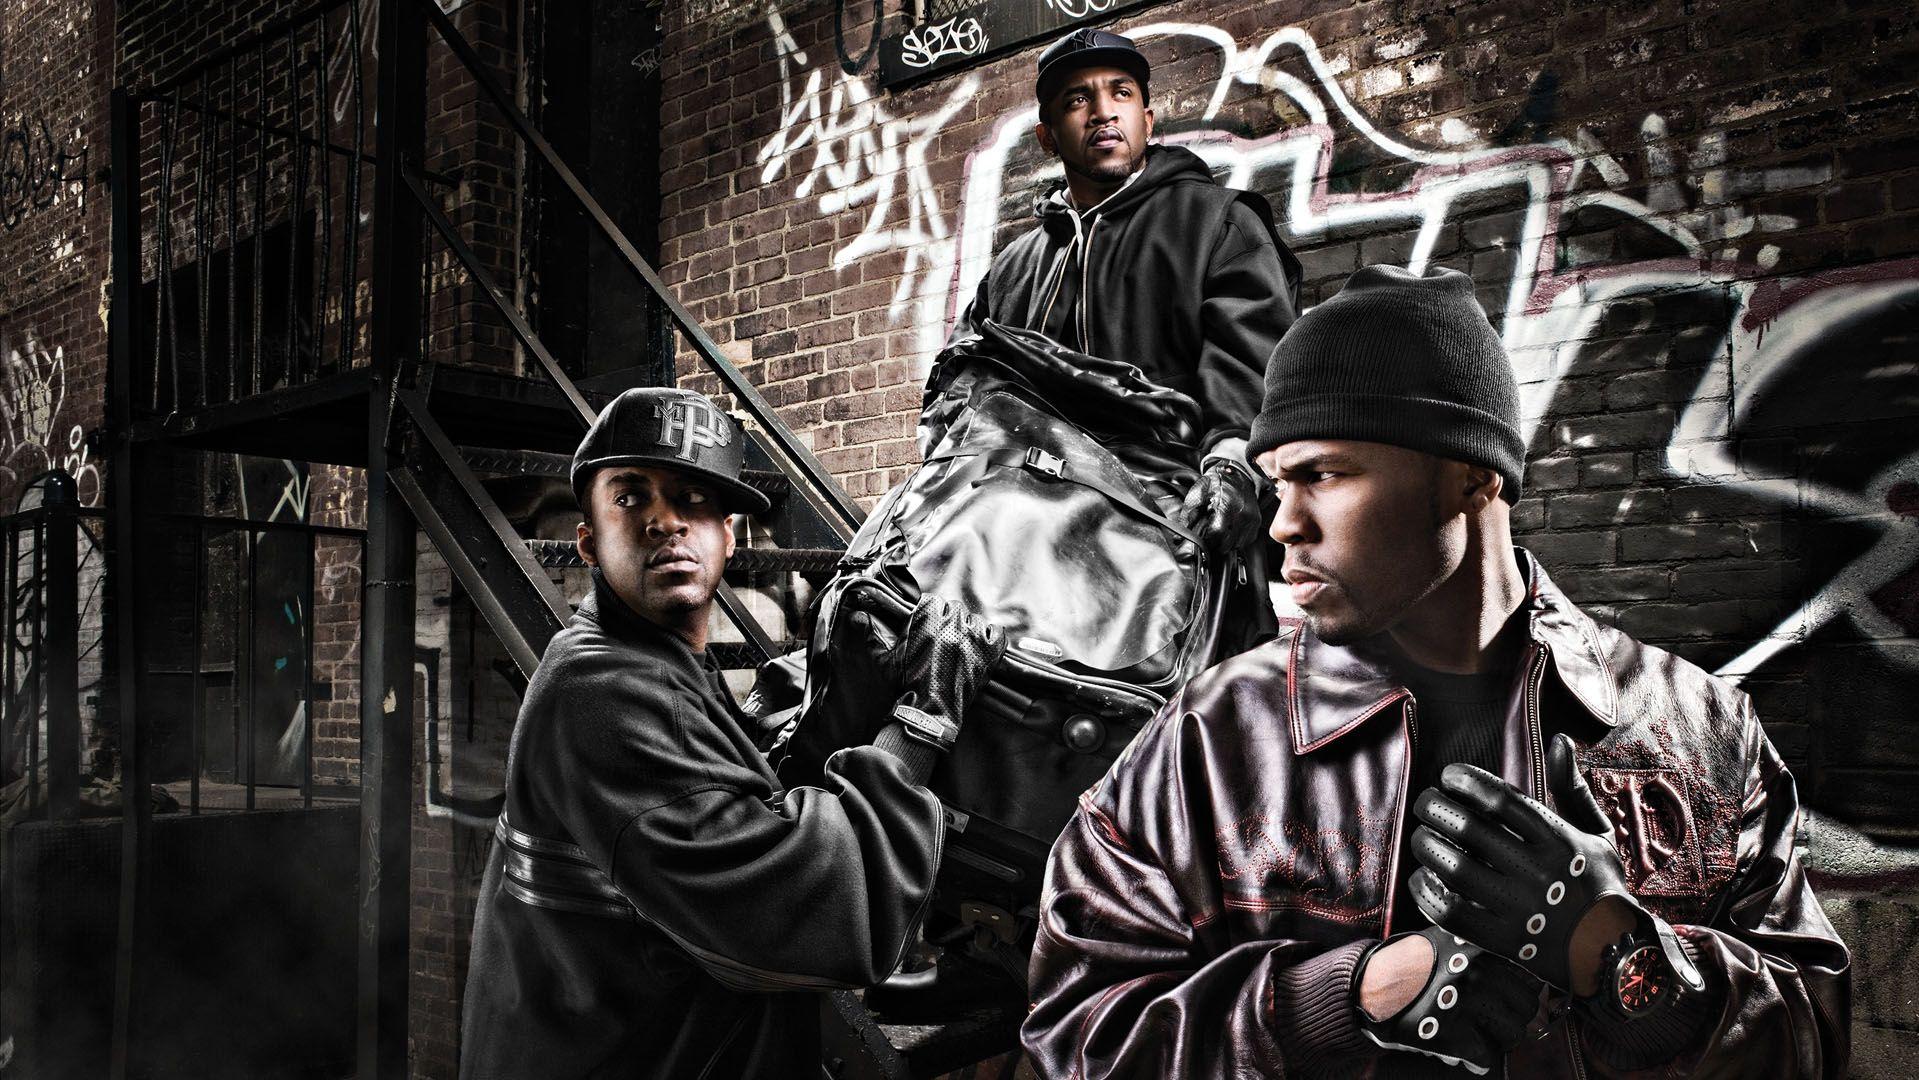 G-Unit Wallpapers